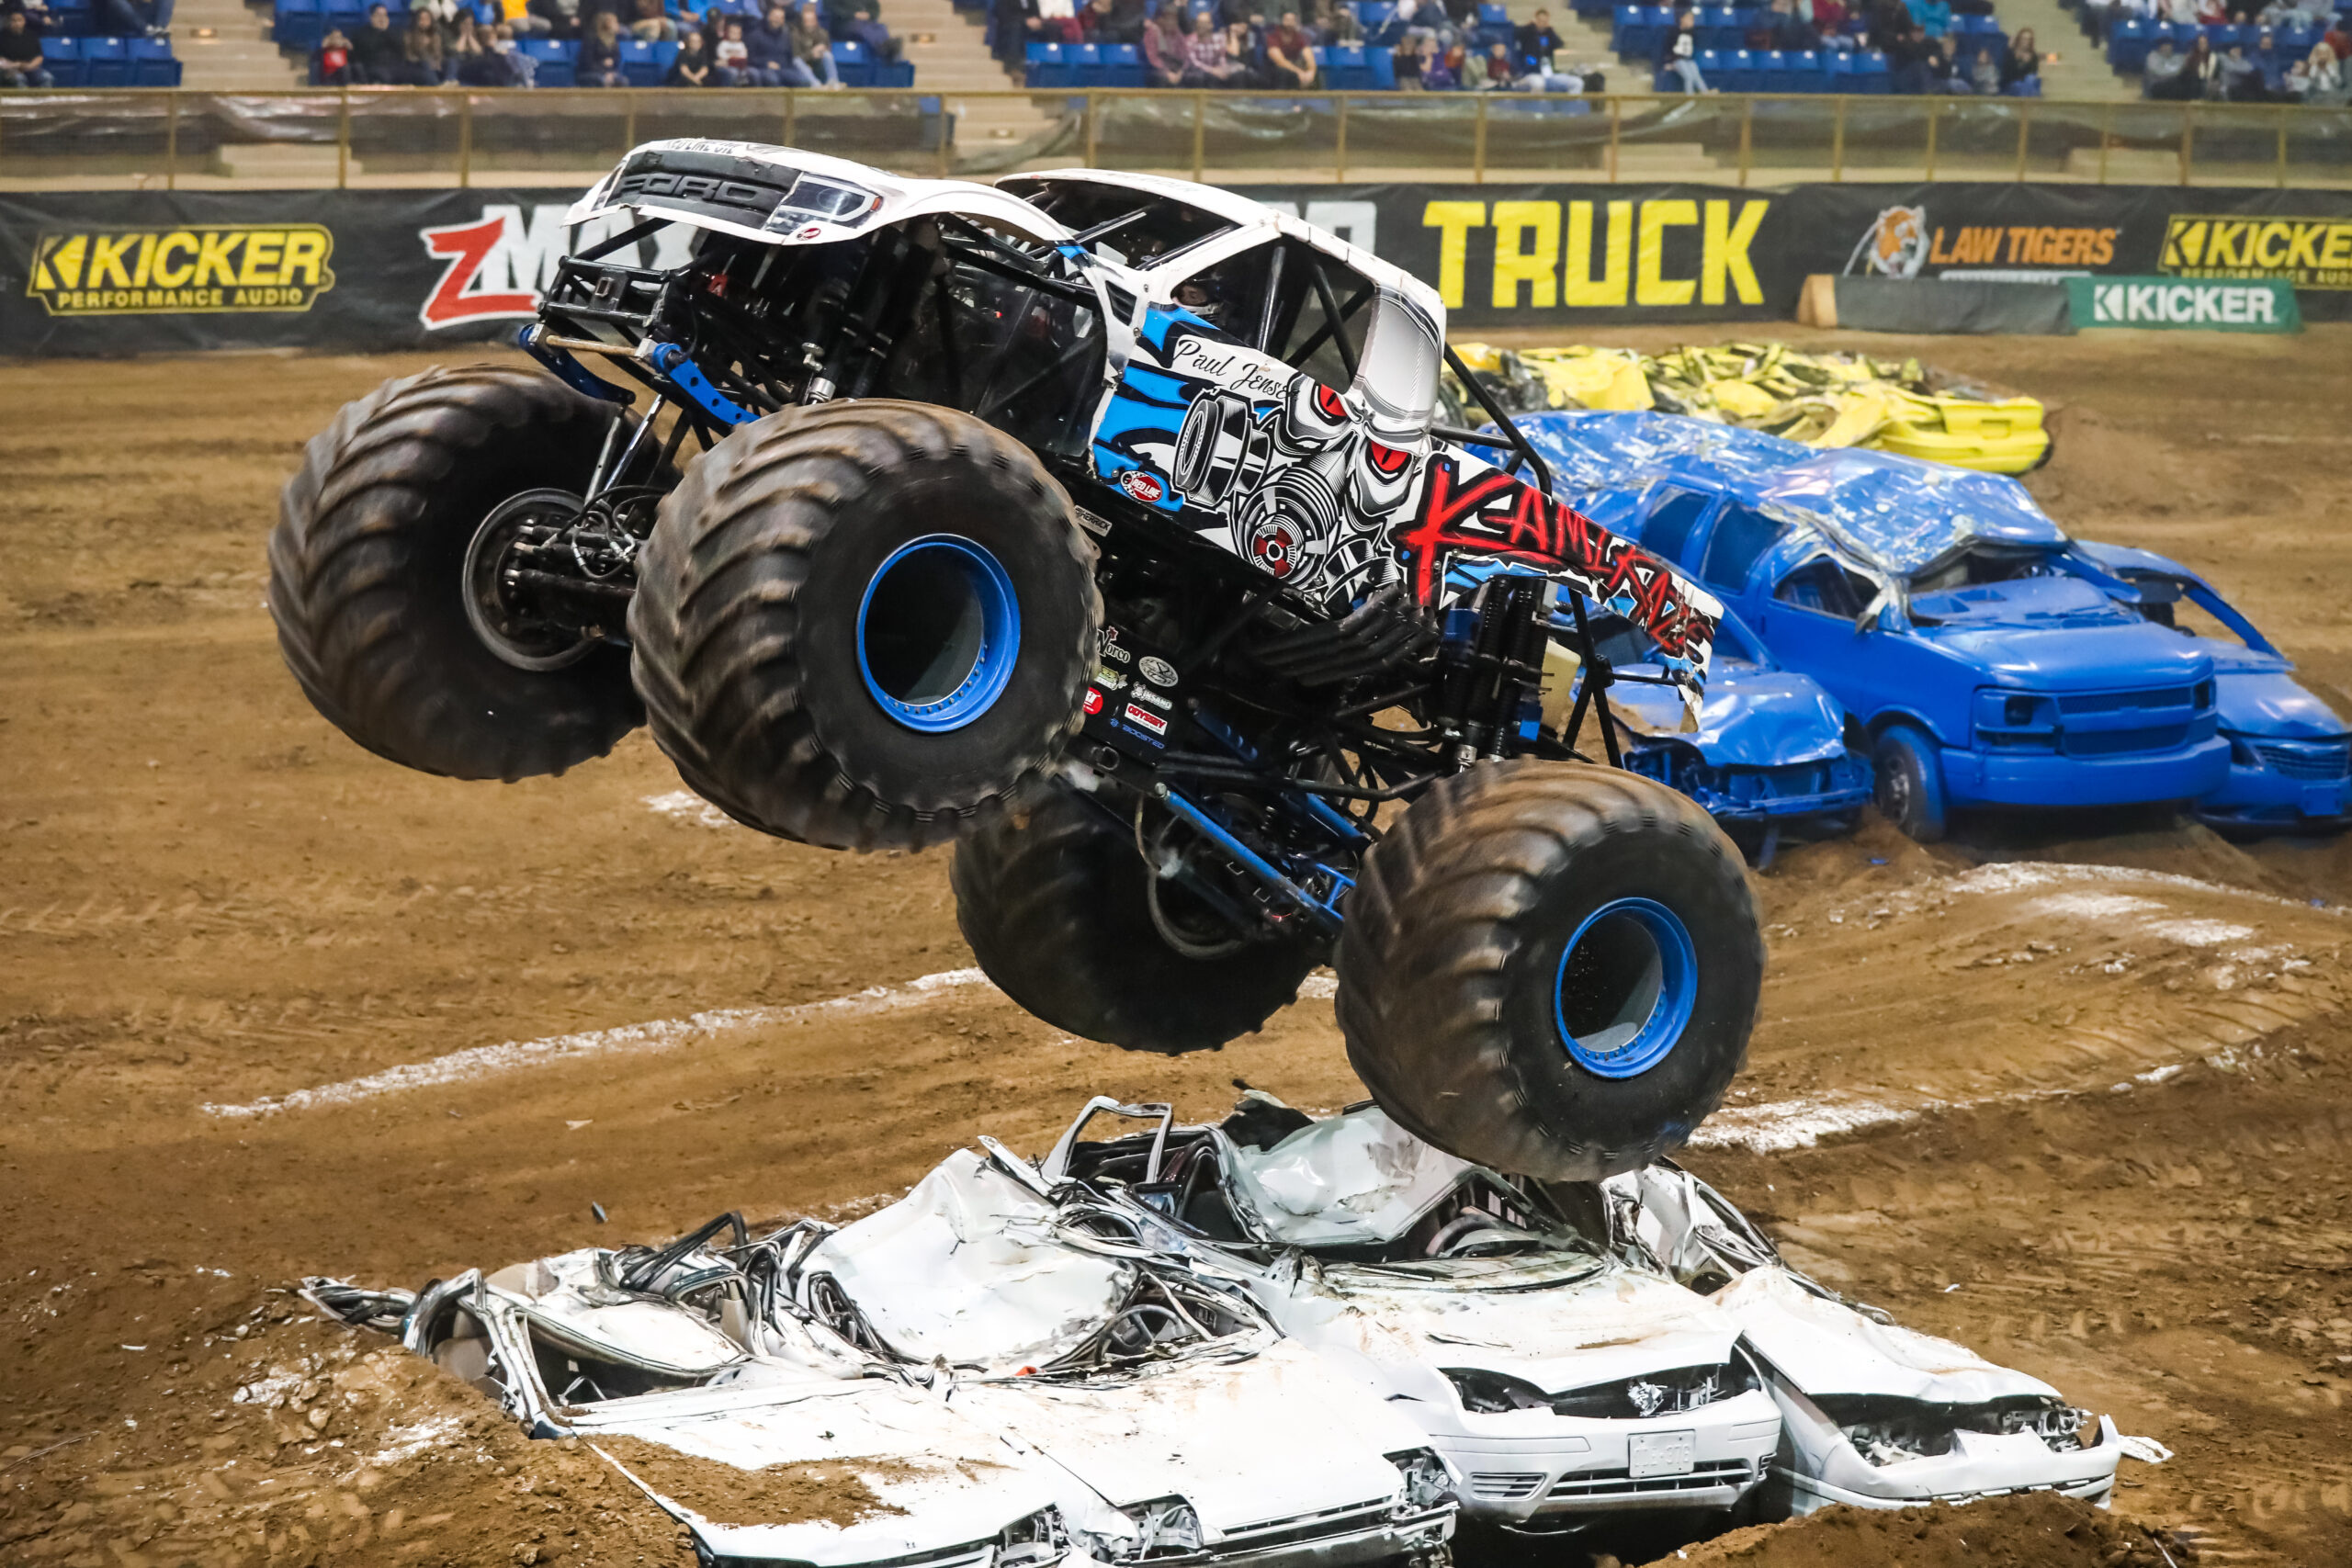 Monster Truck: Kicker Monster Truck Show, Adrenaline-charged family entertainment events, Oversized tires. 2560x1710 HD Wallpaper.